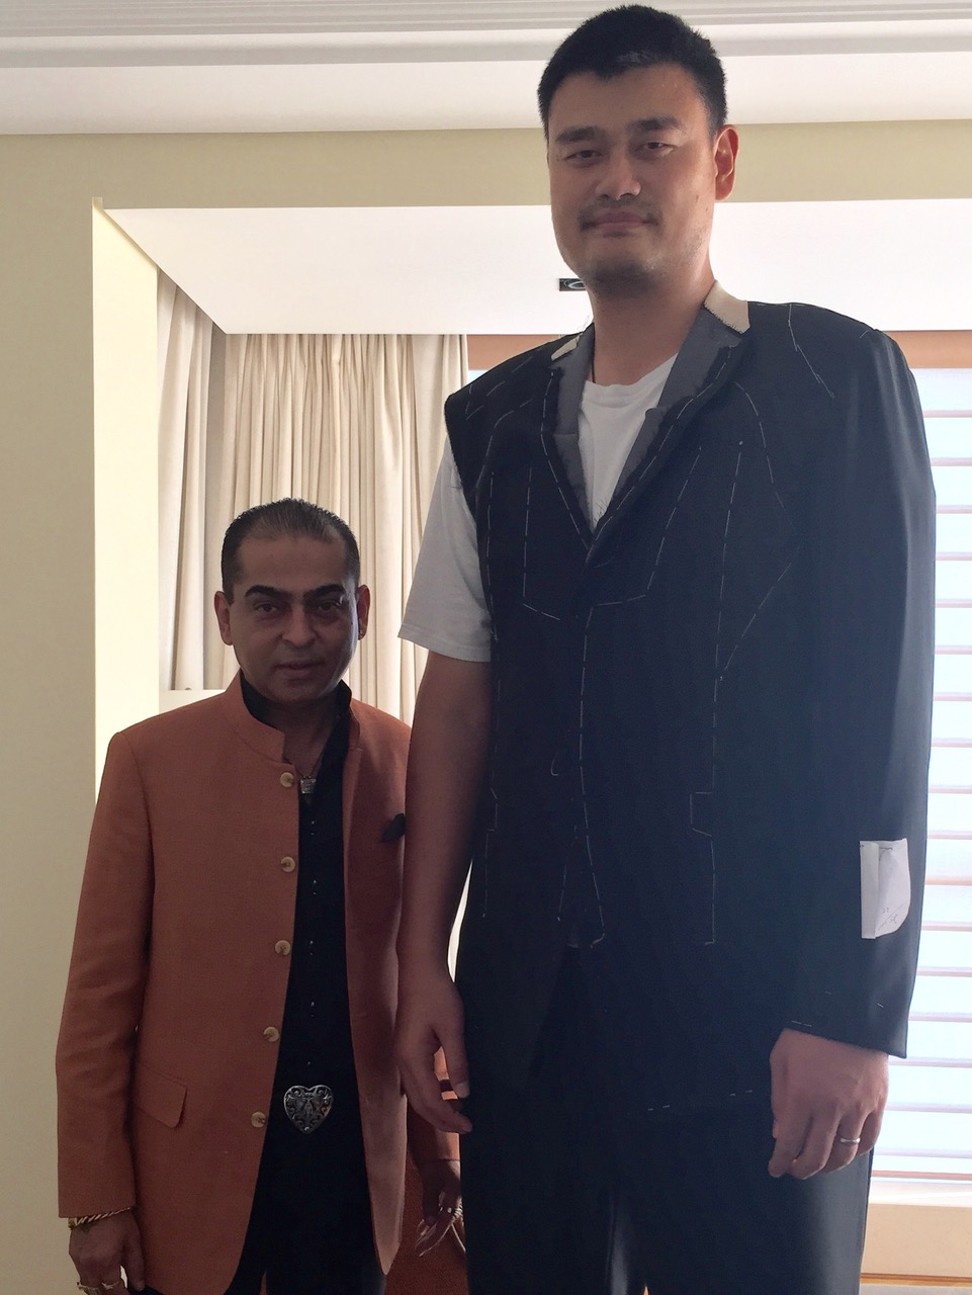 Tony the tailor with NBA legend Yao Ming, the “tallest person he ever had to dress”. Photo: Handout